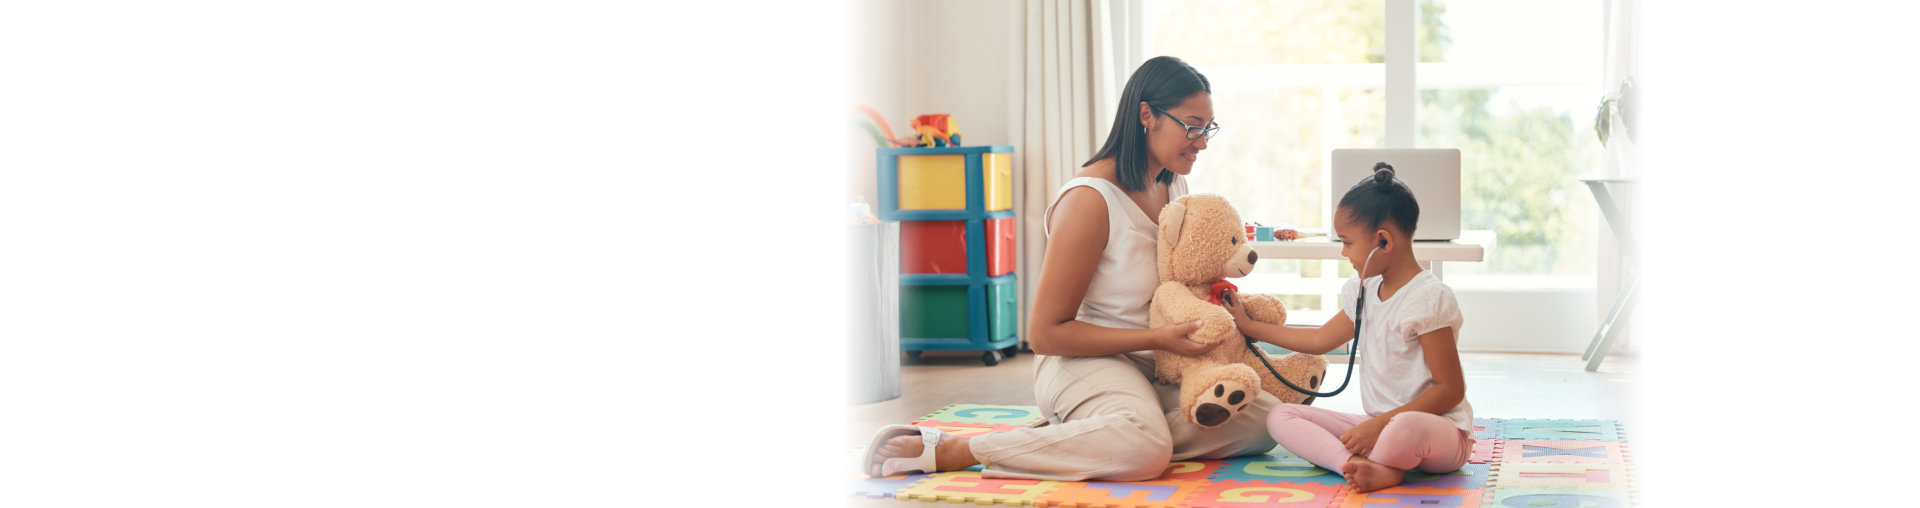 Kindergarten, education and stethoscope with teacher and girl playing doctor game with teddy bear for development, learning and care. Classroom, wellness and therapist with young student and woman